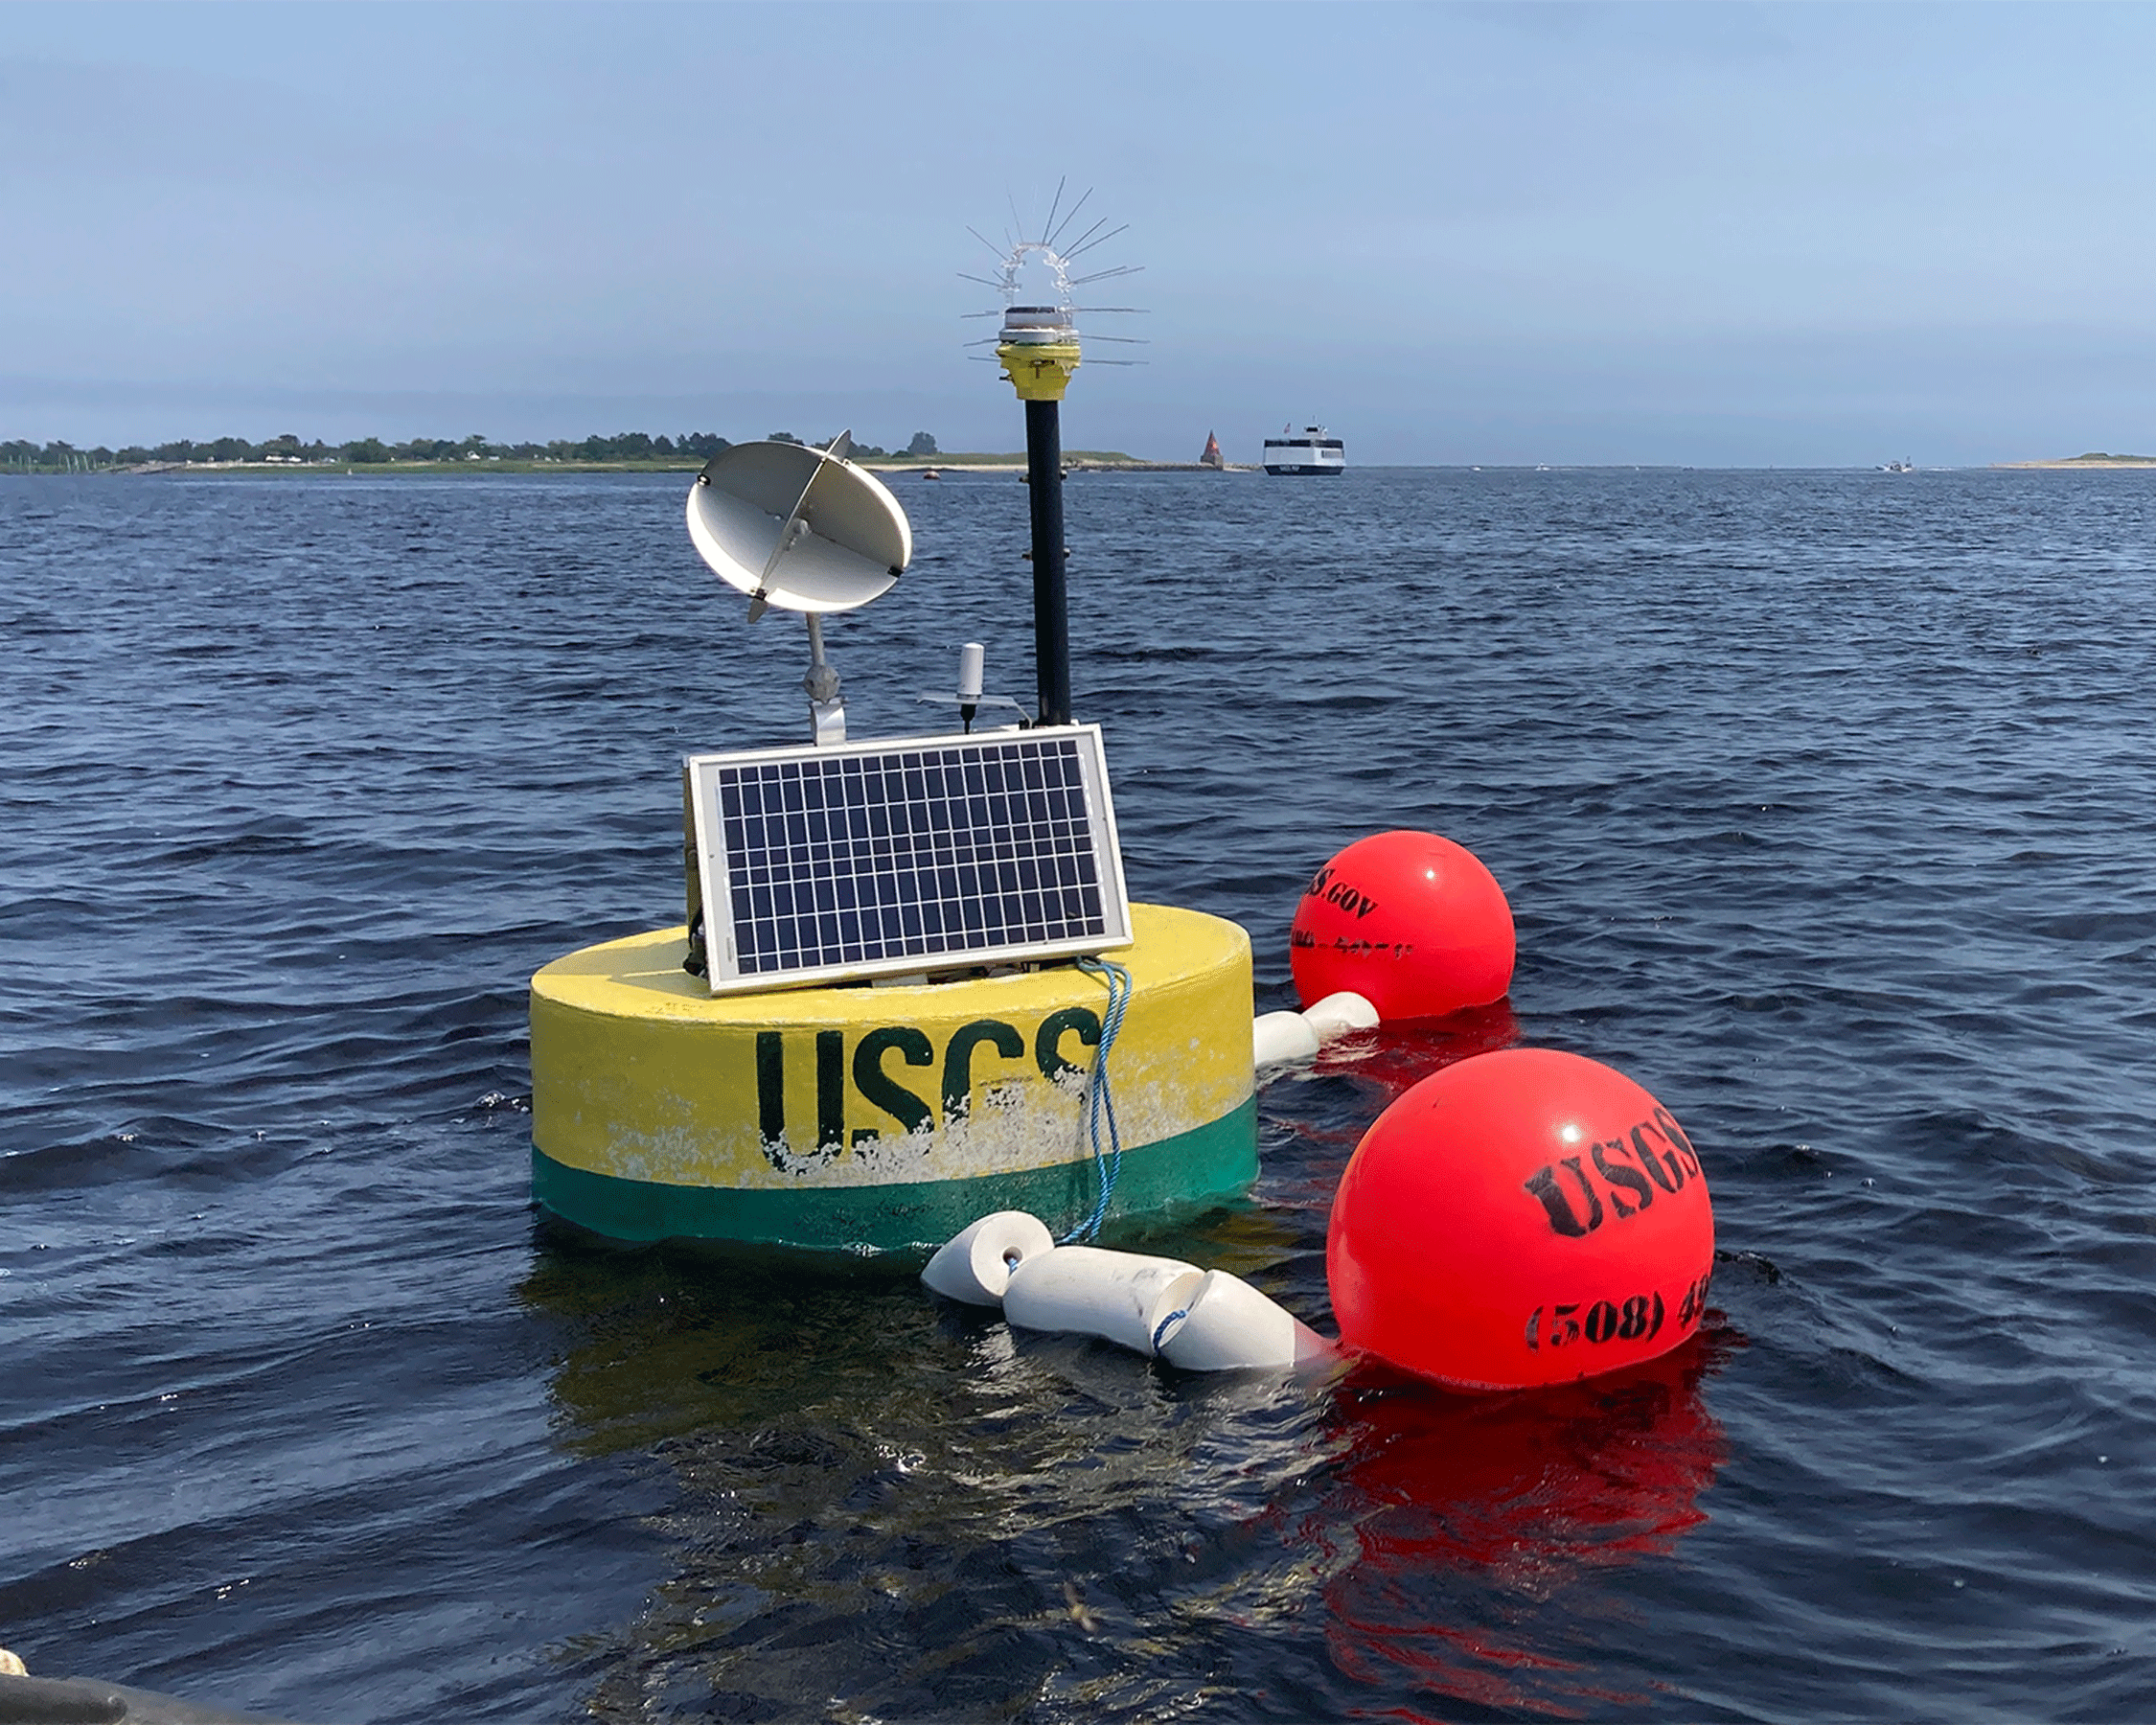 Photograph of a small yellow buoy marked “USGS” floating in a wide bay, outfitted
                     with a solar panel, lights, equipment, and high-visibility floats.